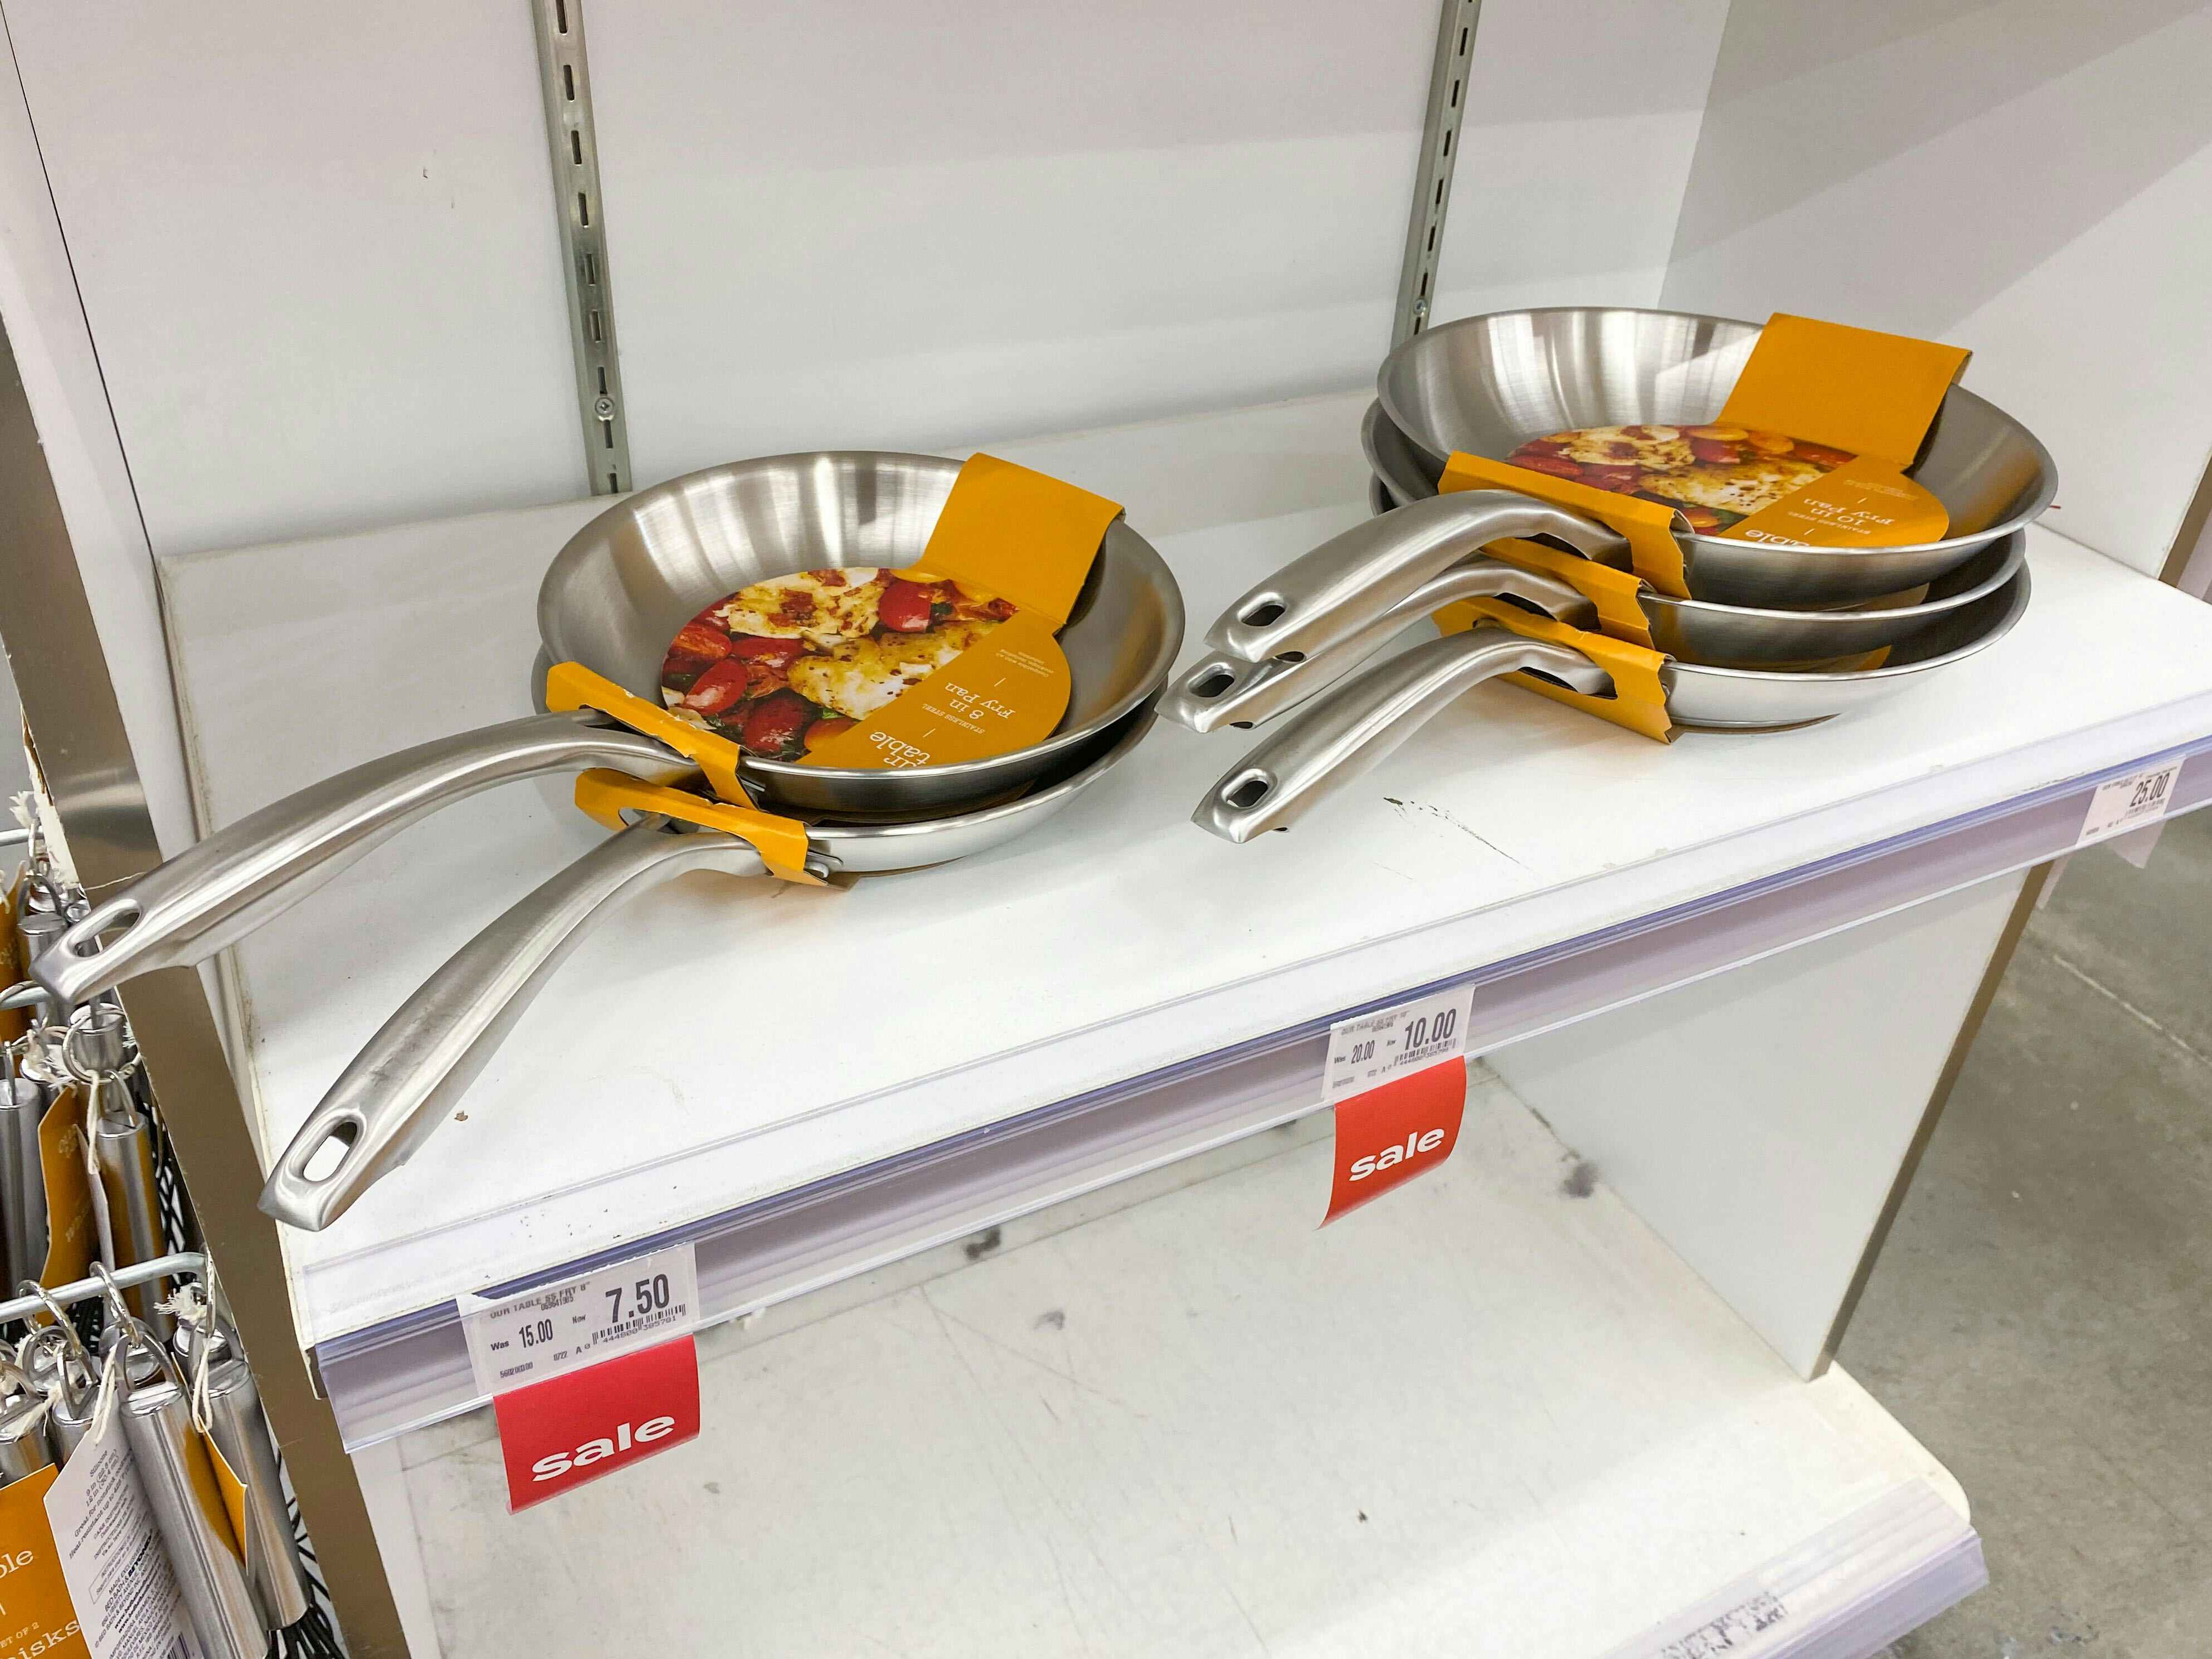 stainless steel fry pan on white shelf at angle